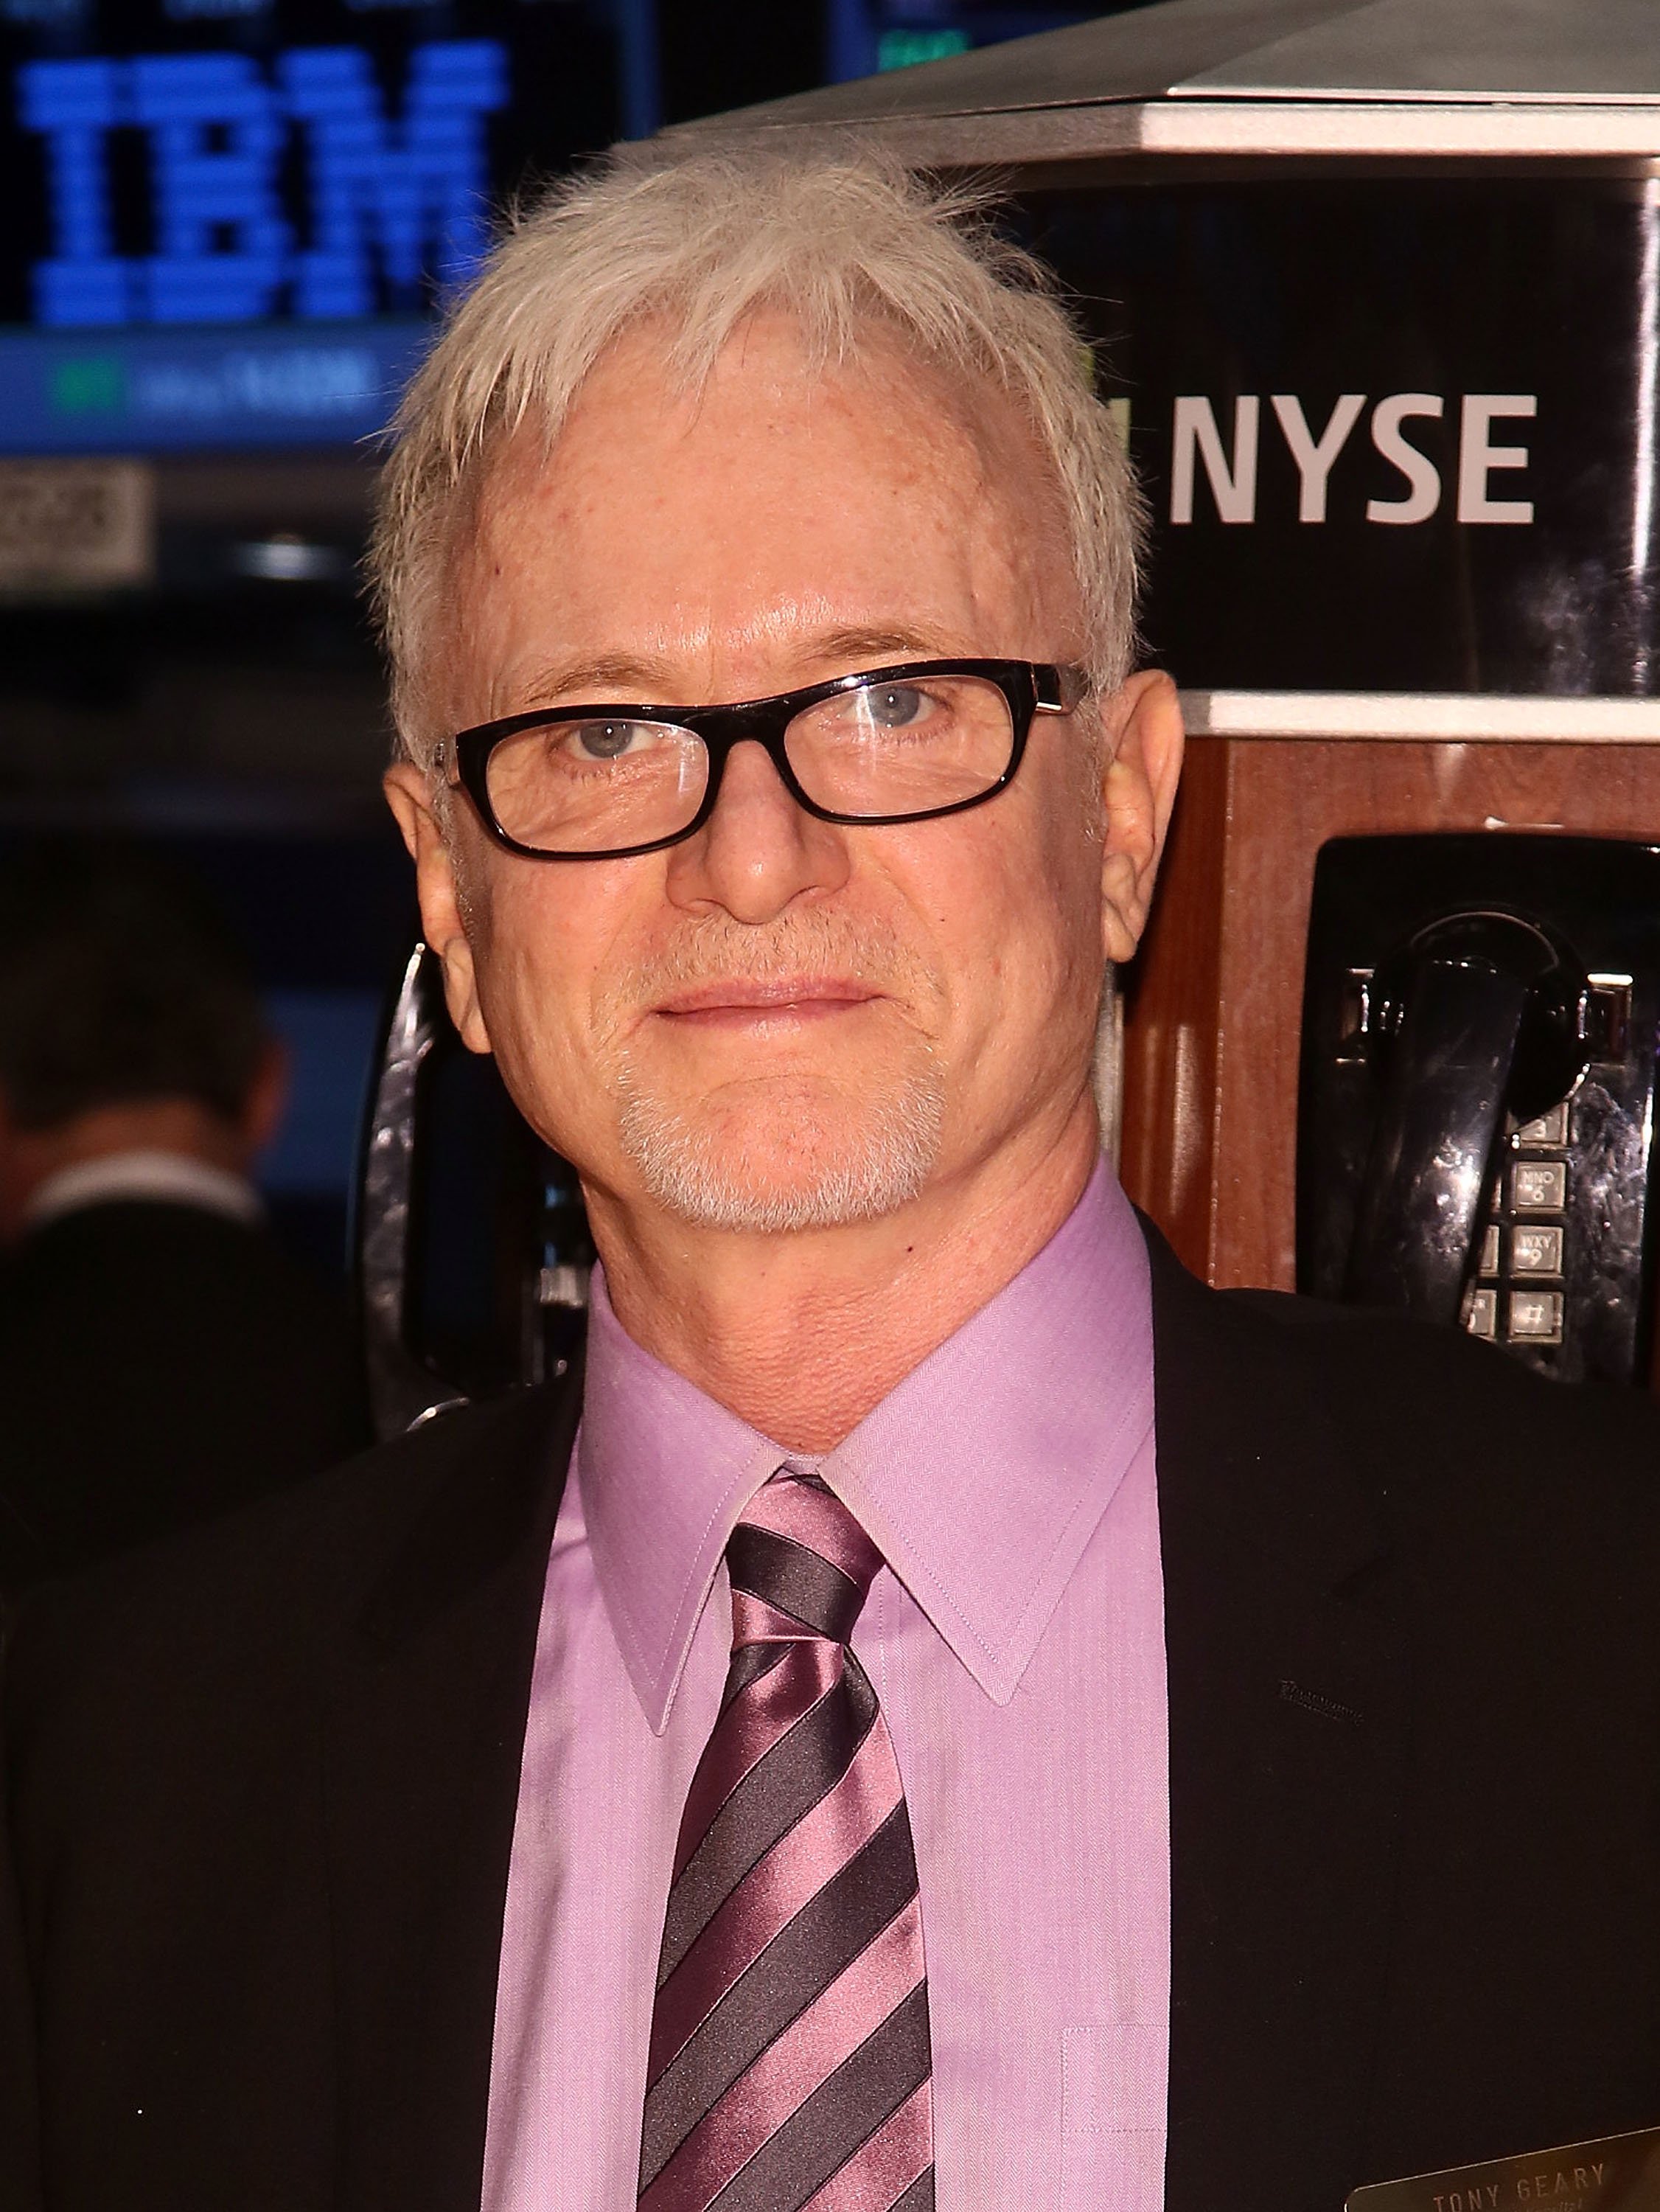 Actor Tony Geary ABC's soap opera General Hospital rings the opening bell at the New York Stock Exchange on April 1, 2013 in New York City. | Source: Getty Images